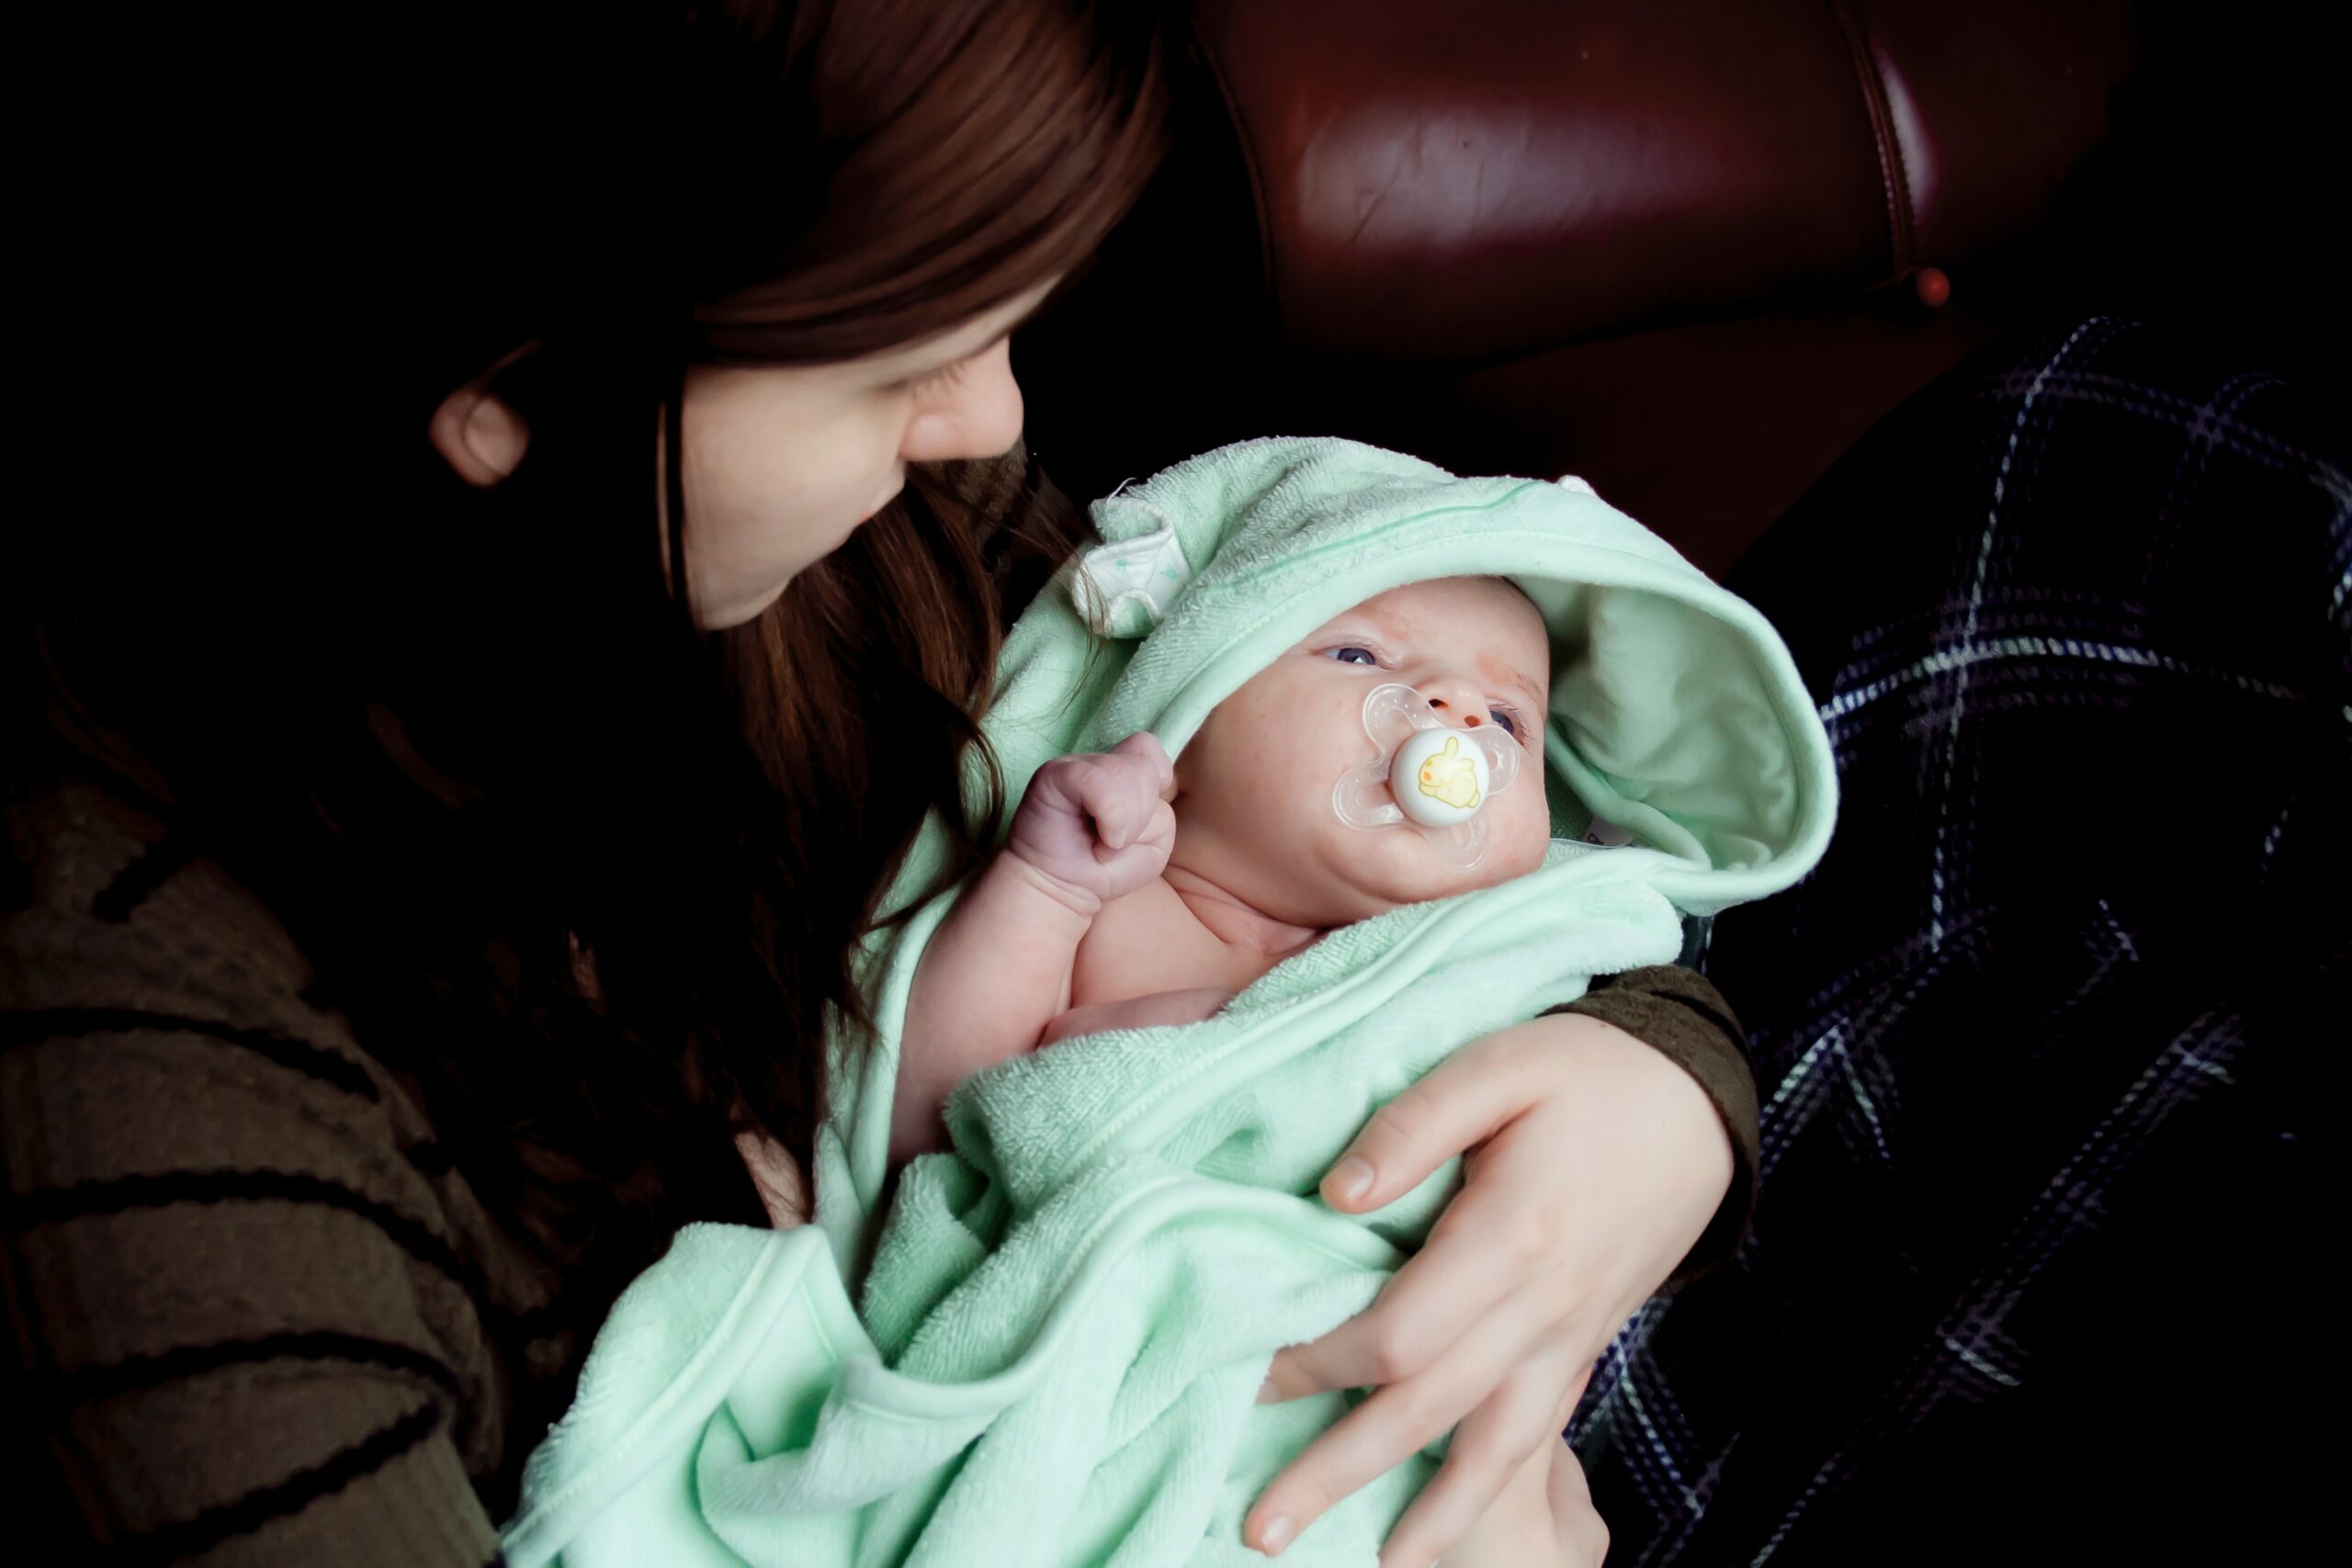 mum looking down at the baby she's holding wrapped in a green towel